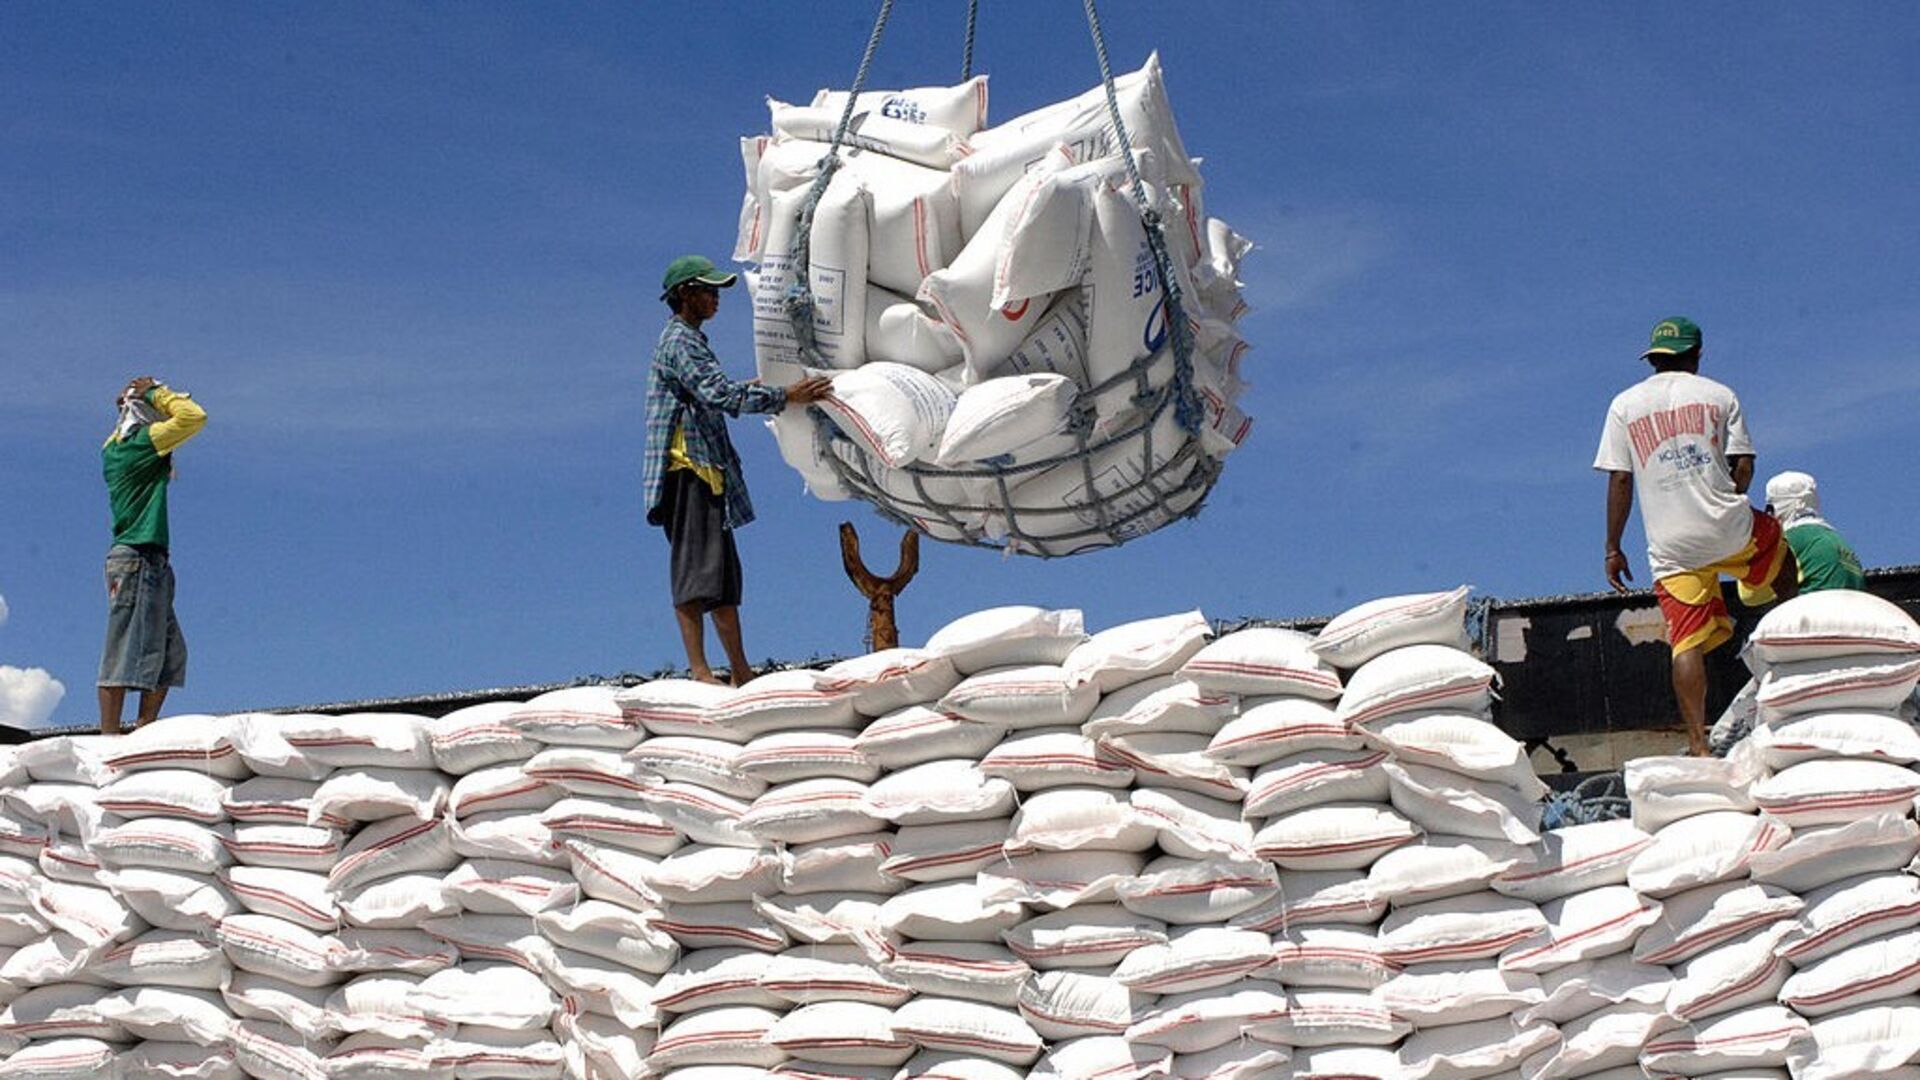 India Considers Banning Most Rice Exports on Inflation Fears - Bloomberg